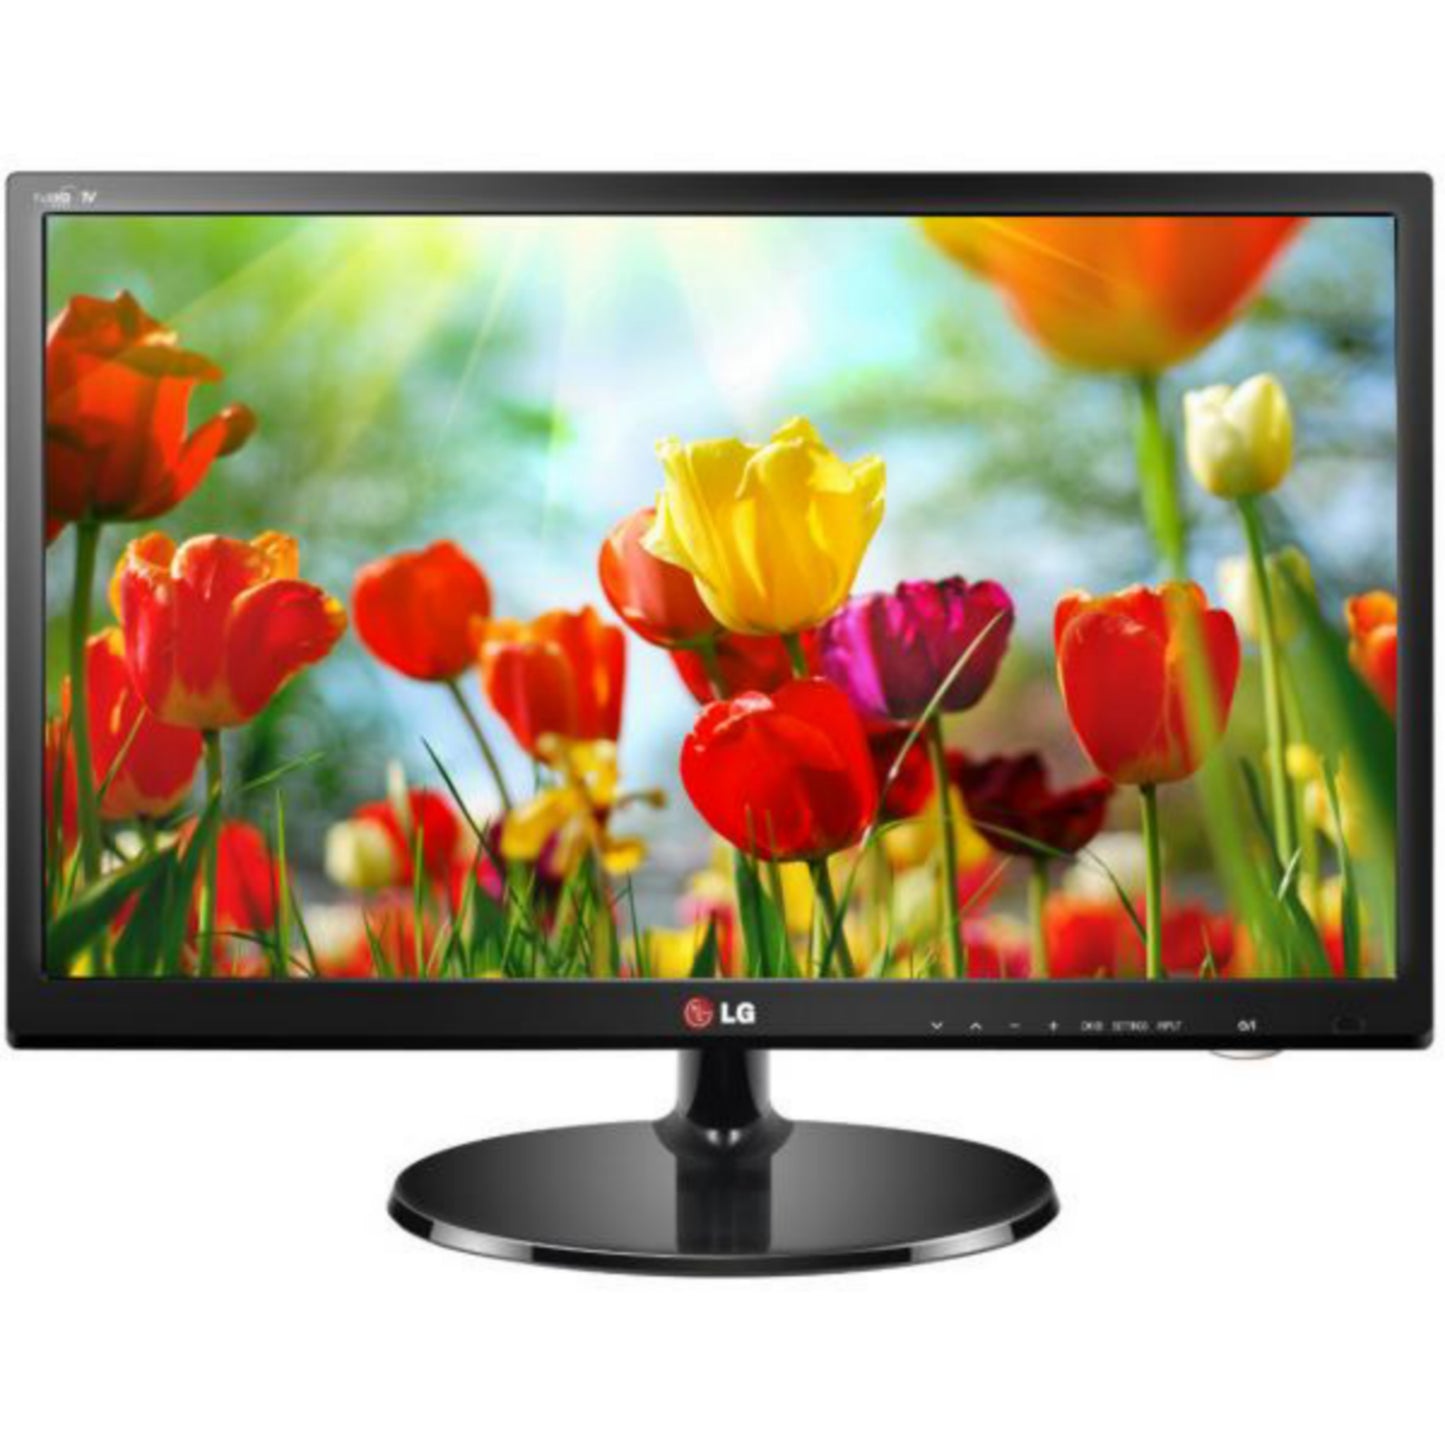 LG 24 Inch 24MN43D-PZ Full HD LED TV - Front View